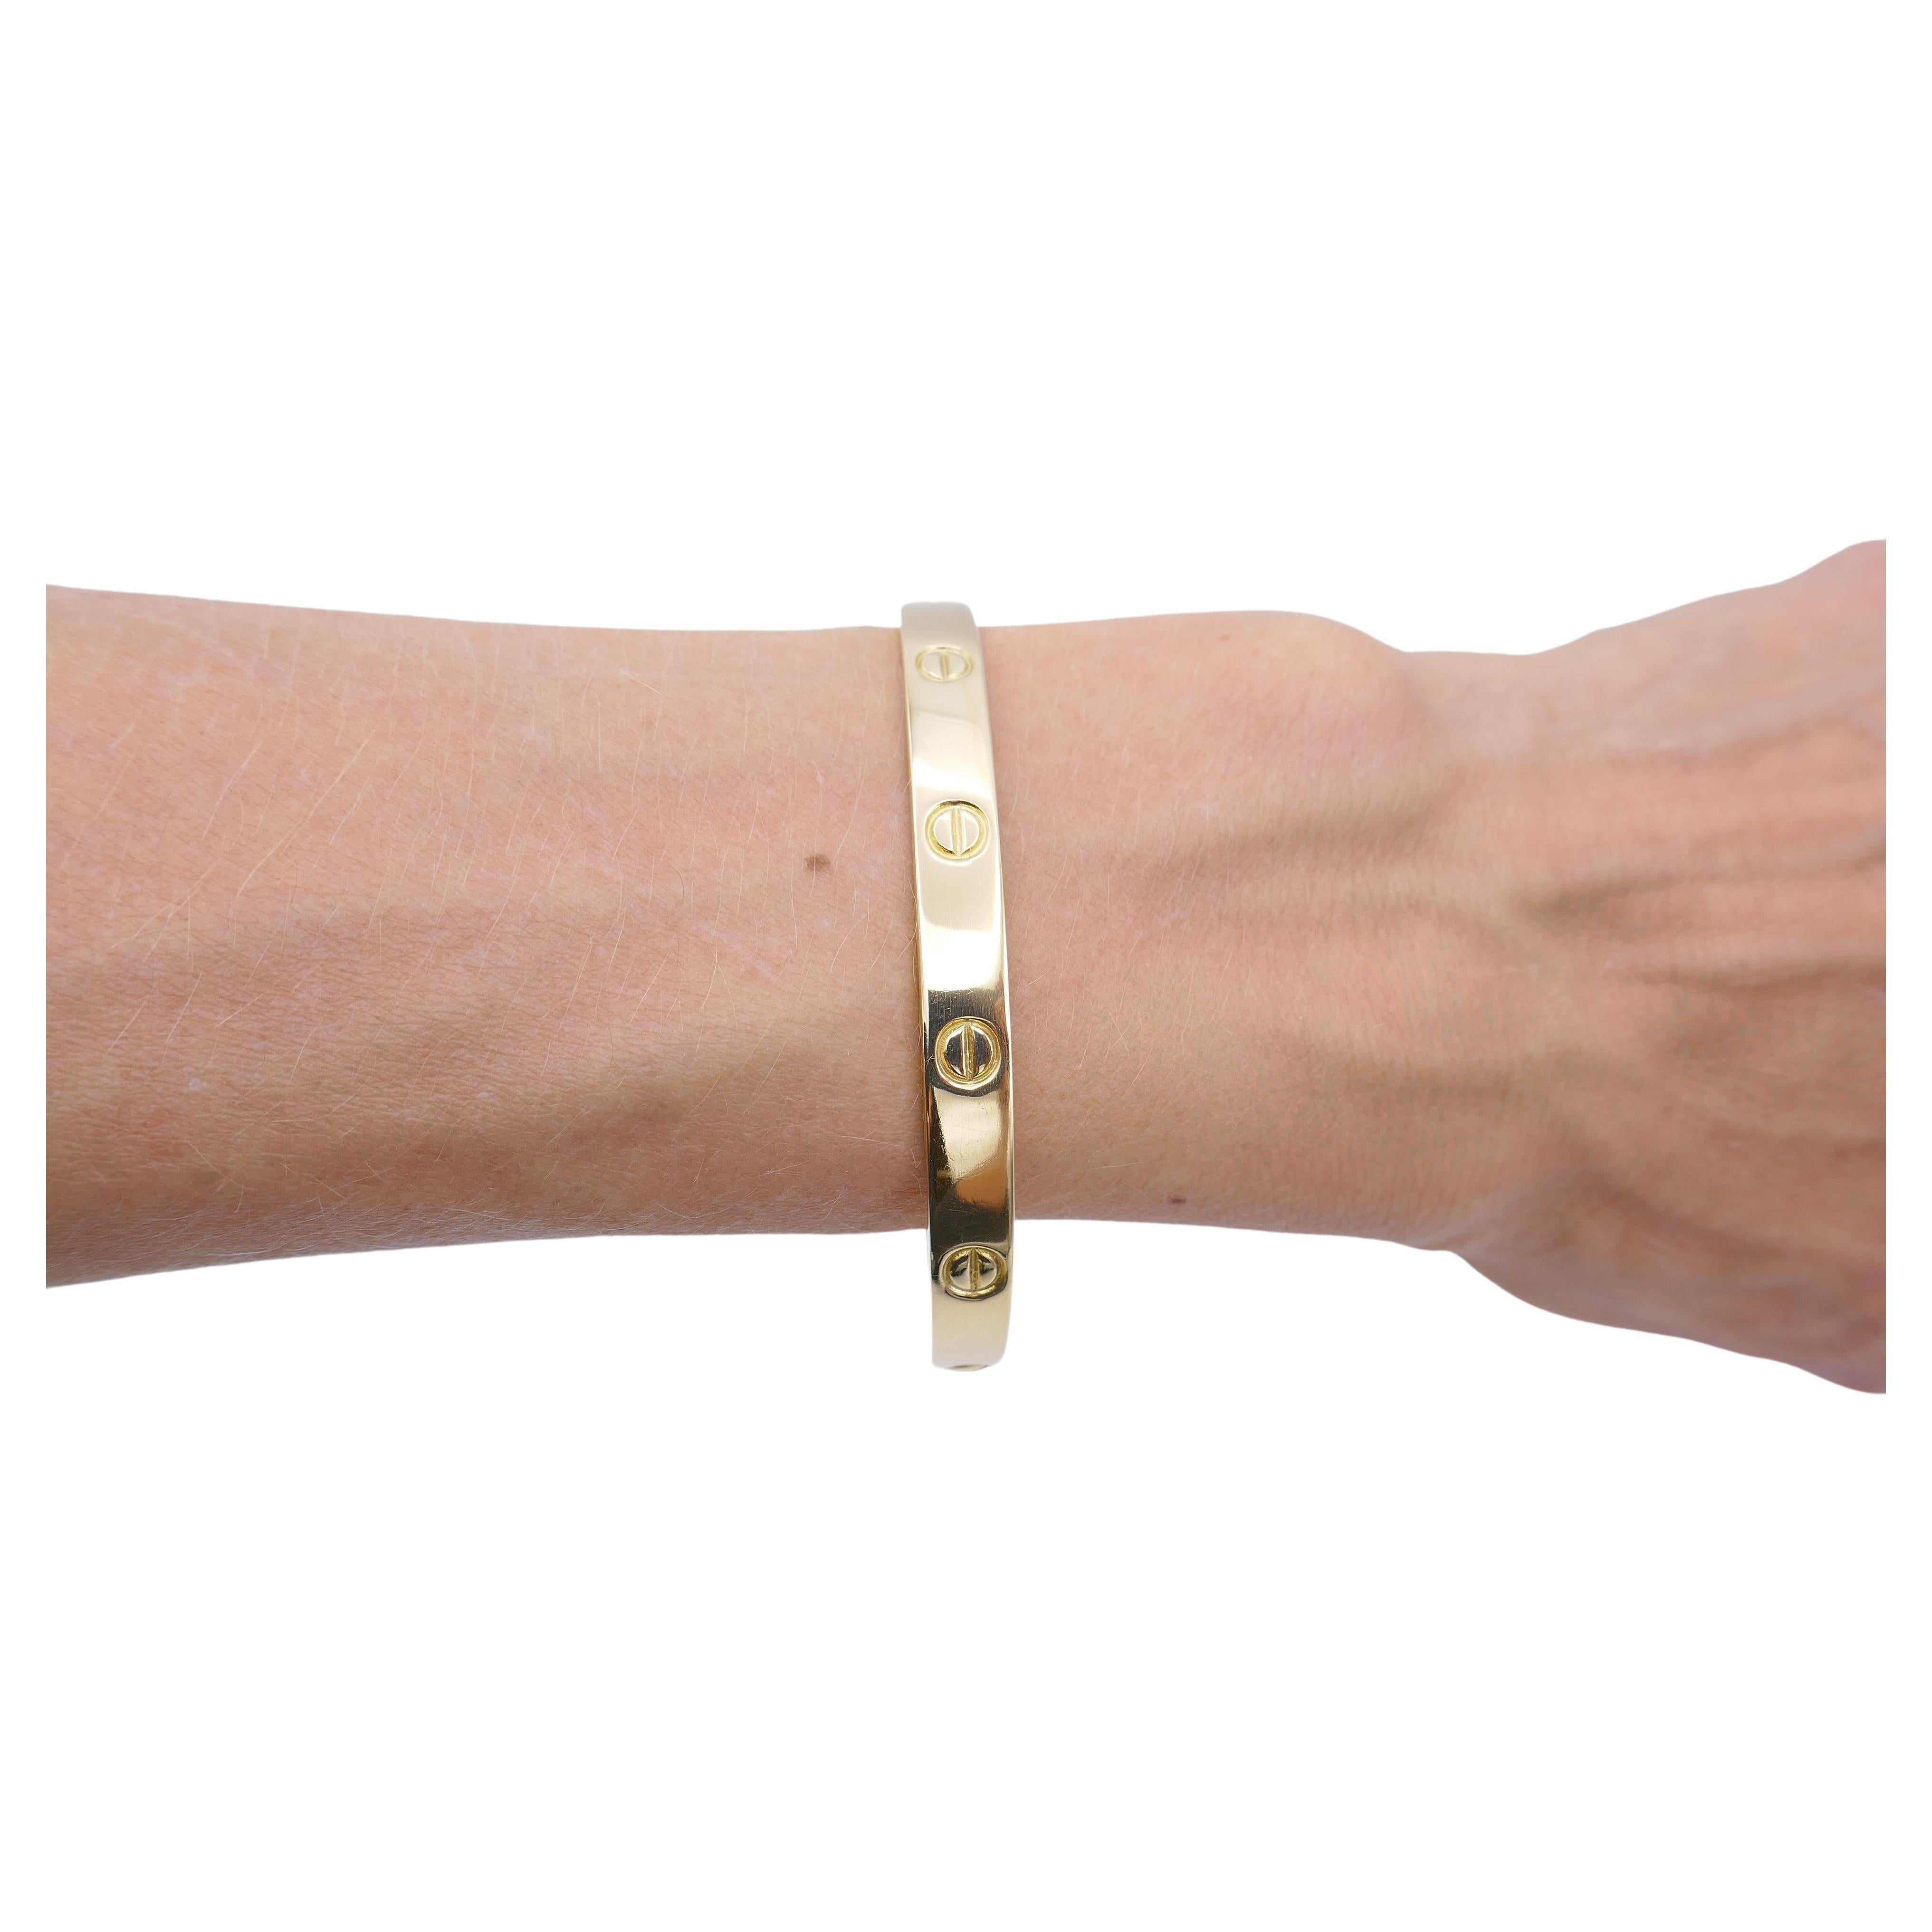 Being a symbol of commitment, a Love bracelet was designed as a minimalistic piece in 1969 and was bound to become iconic. 
The Cartier Love bracelet is supposed to be put on by someone who mutually loves you. Two screws on both sides hold the